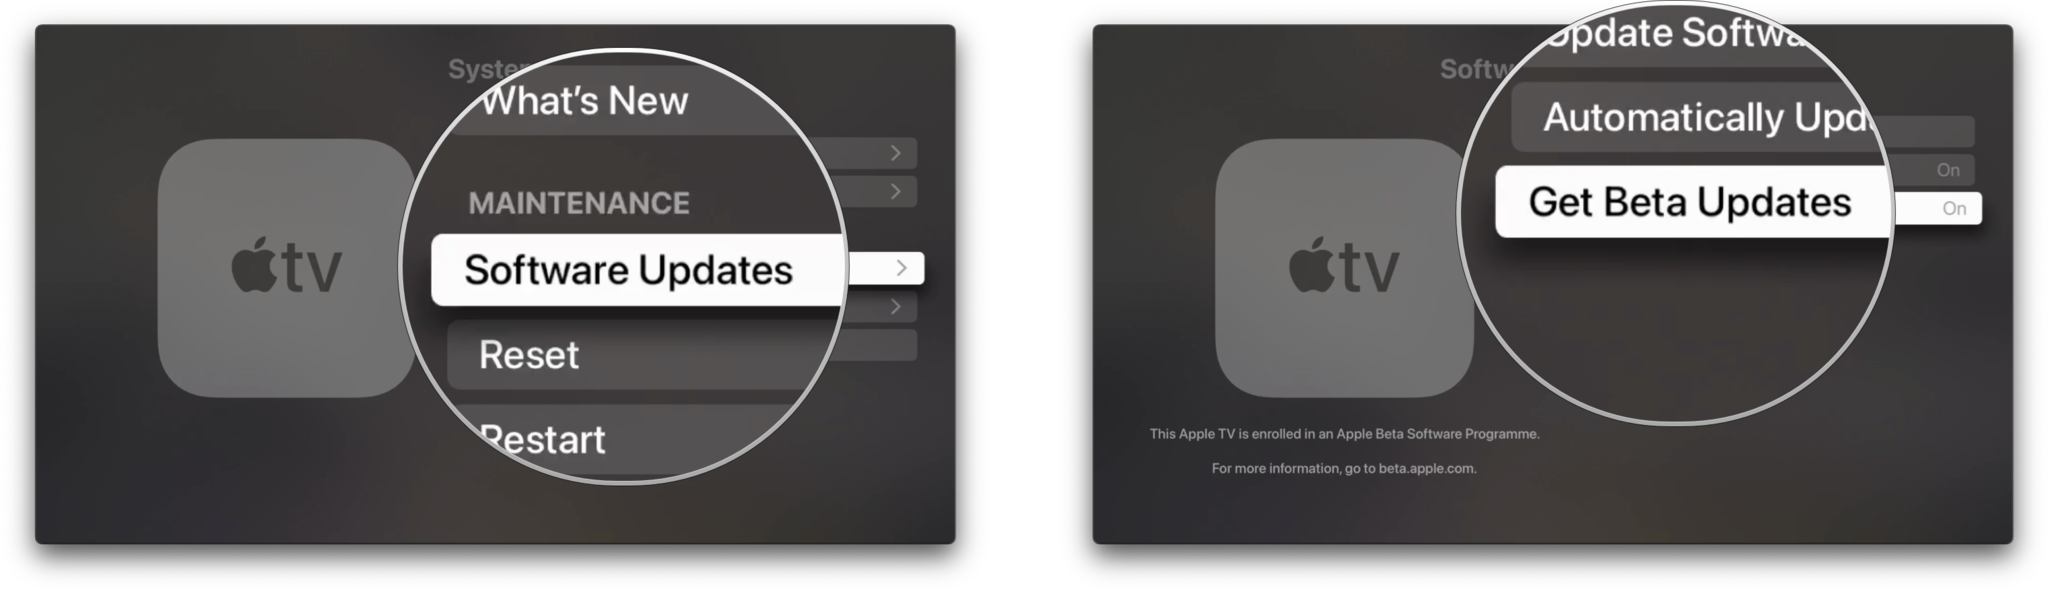 How to update from tvOS beta to the official release: Click on Software Updates, click on Get Beta Updates to turn it Off